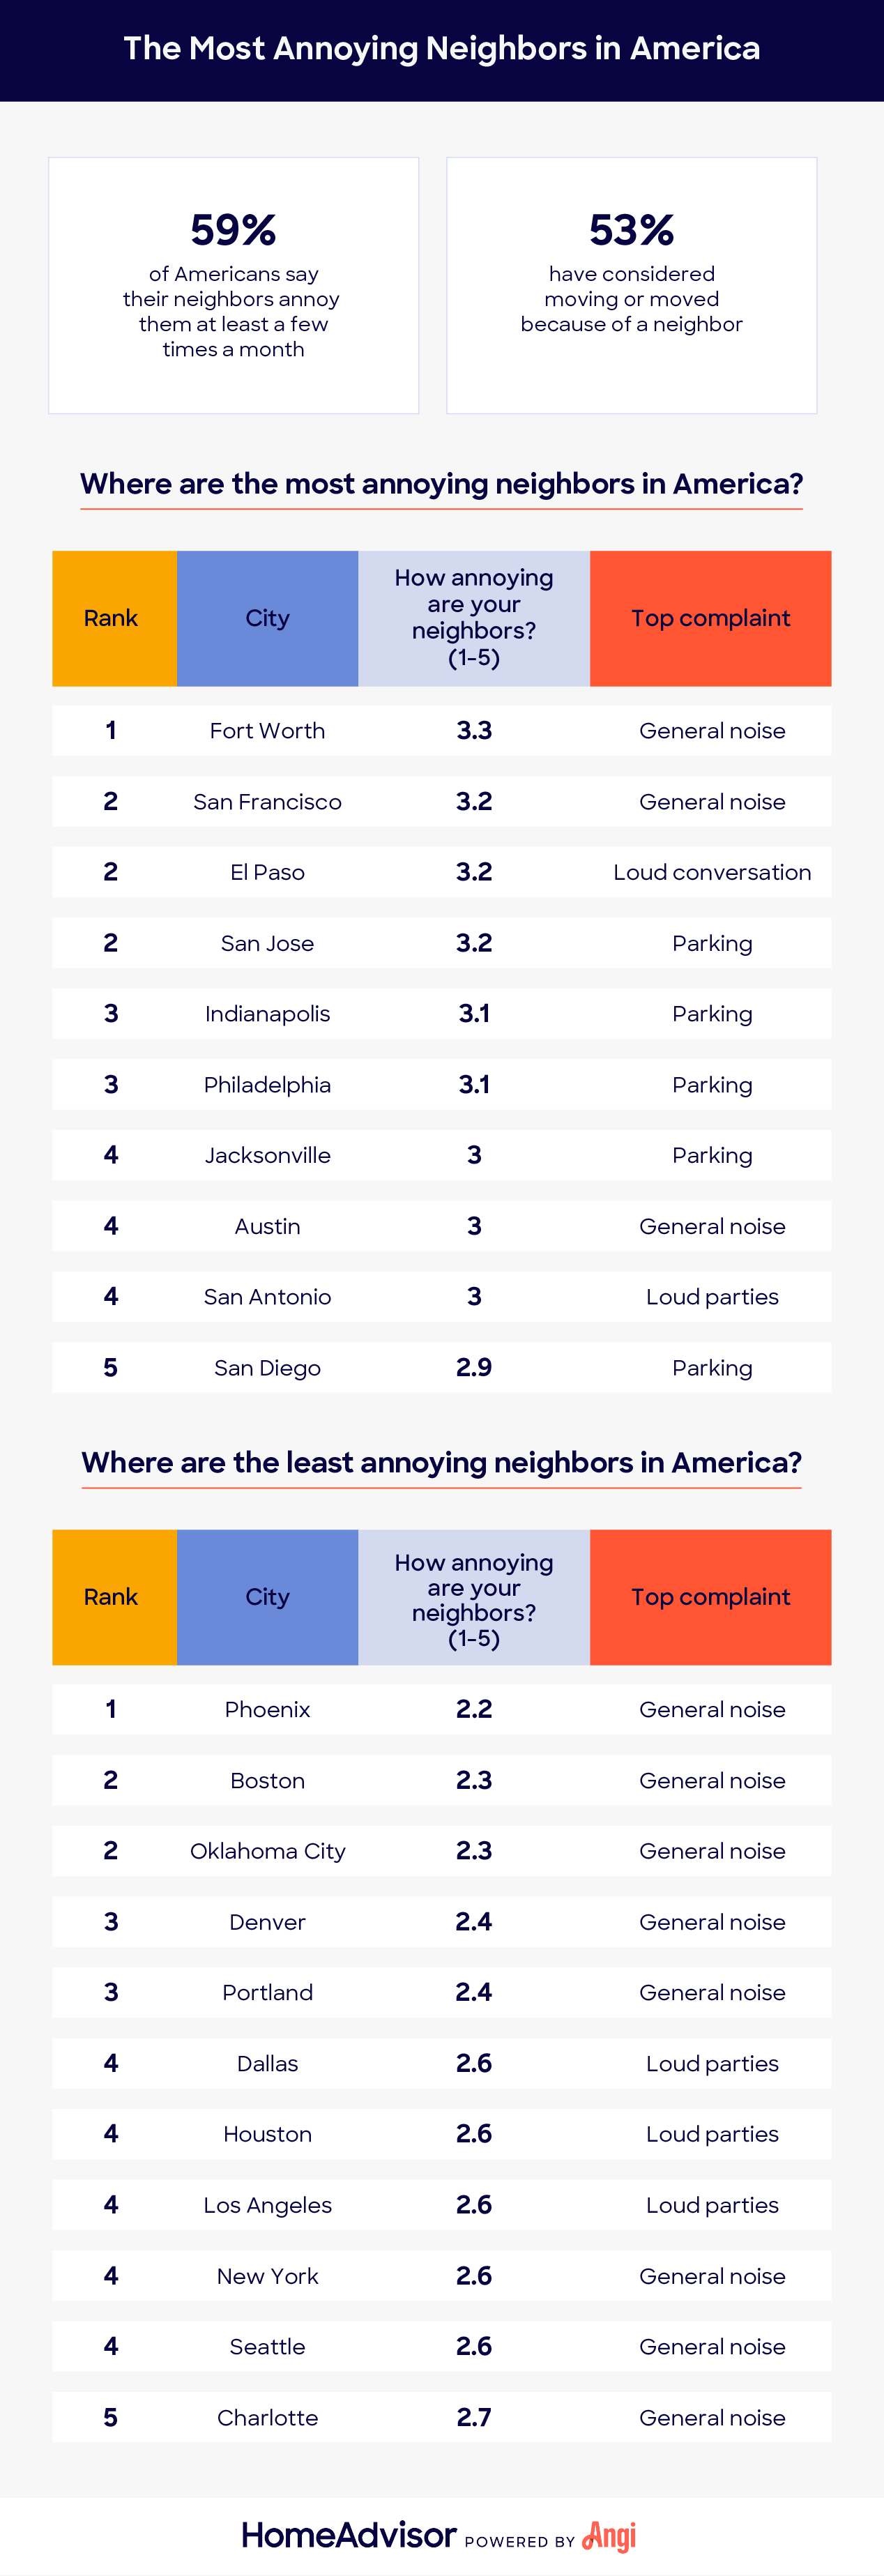 where the most annoying neighbors in america live